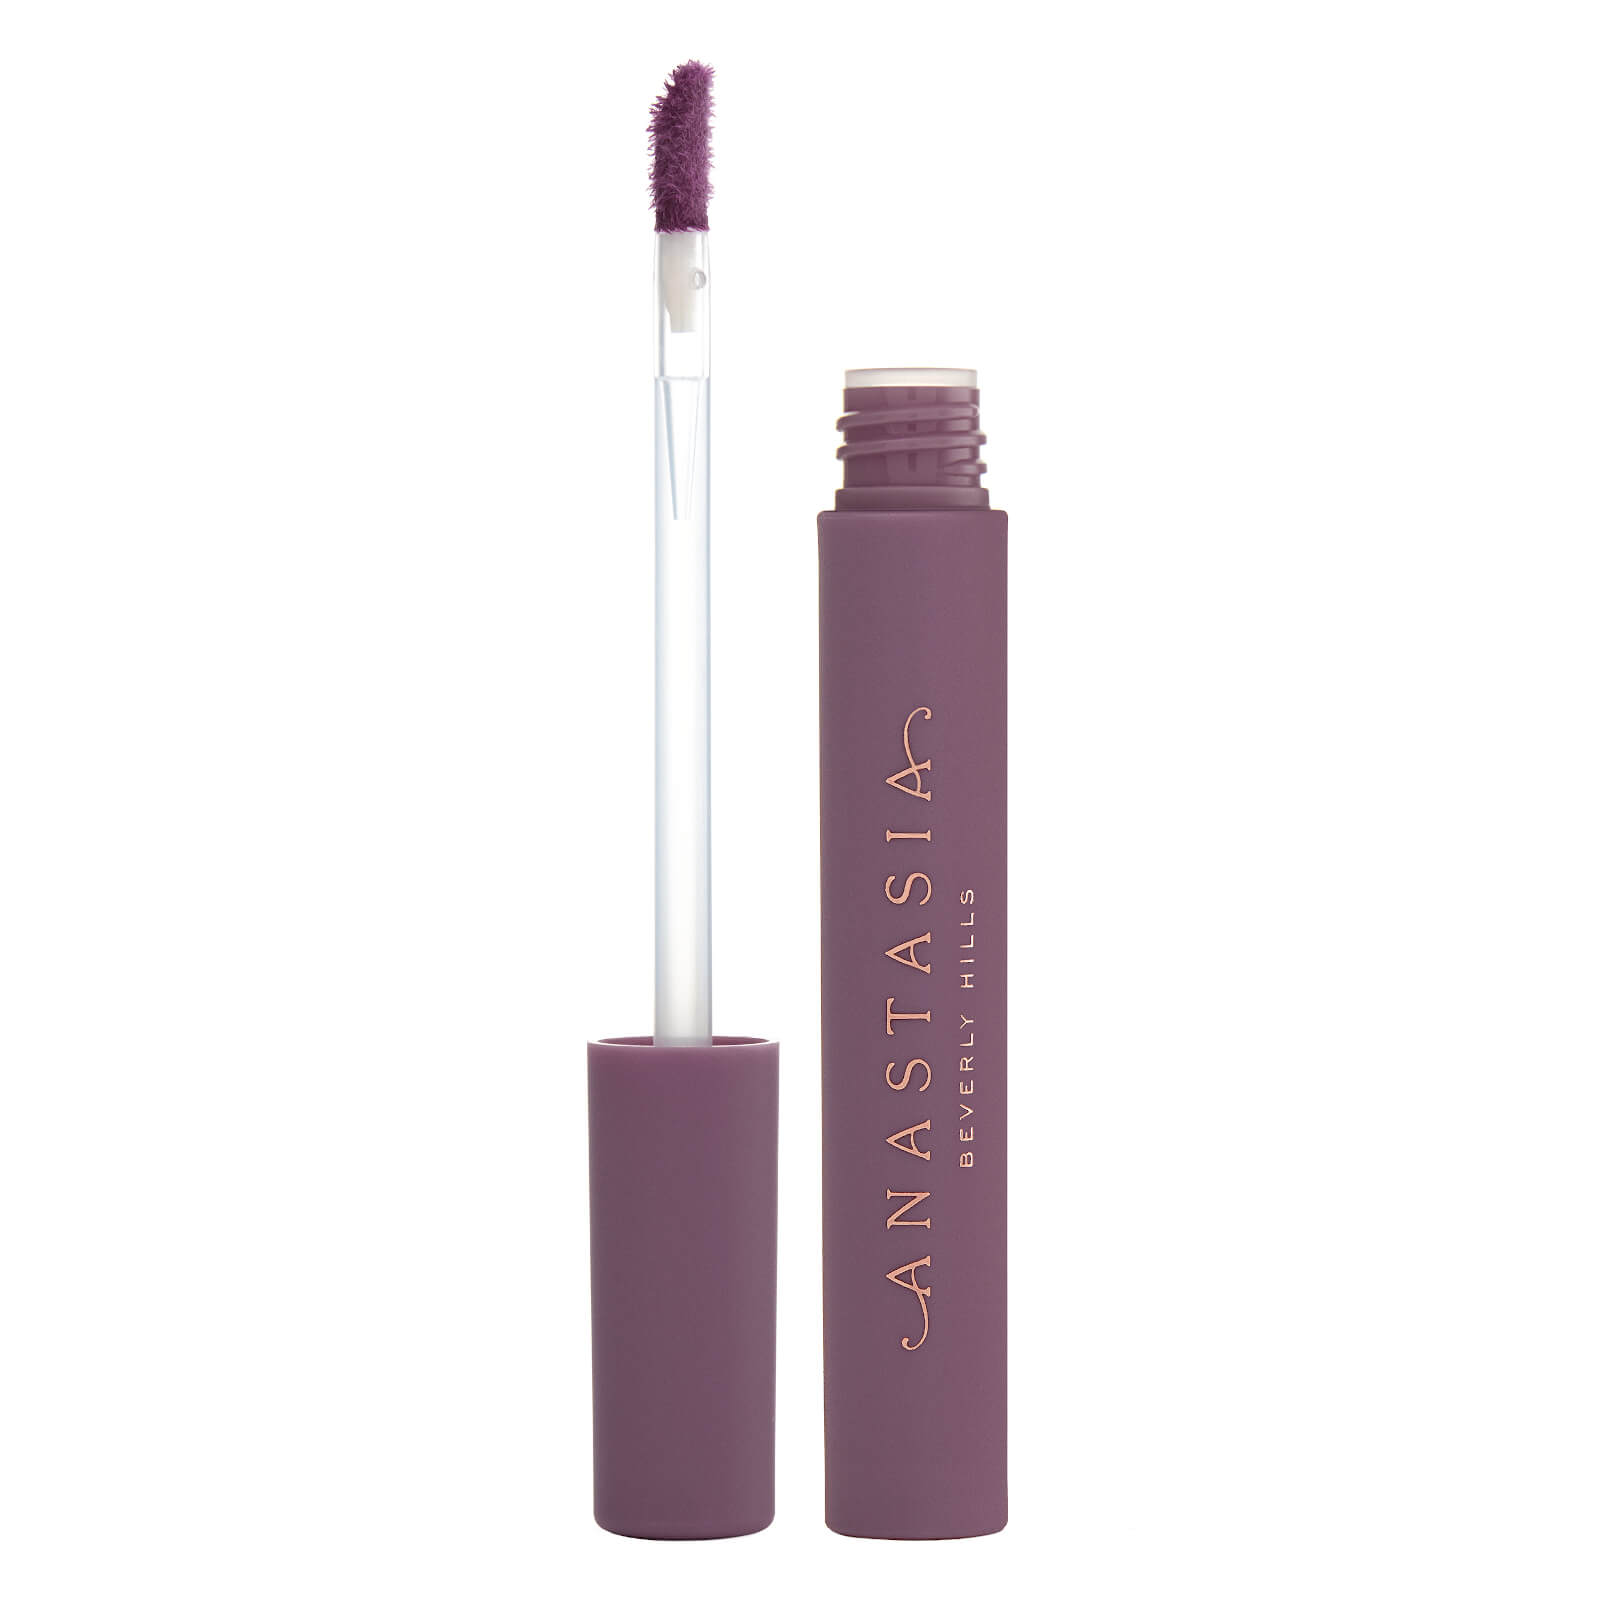 Image of Anastasia Beverly Hills Lip Stain 0.2g (Various Shades) - Orchid